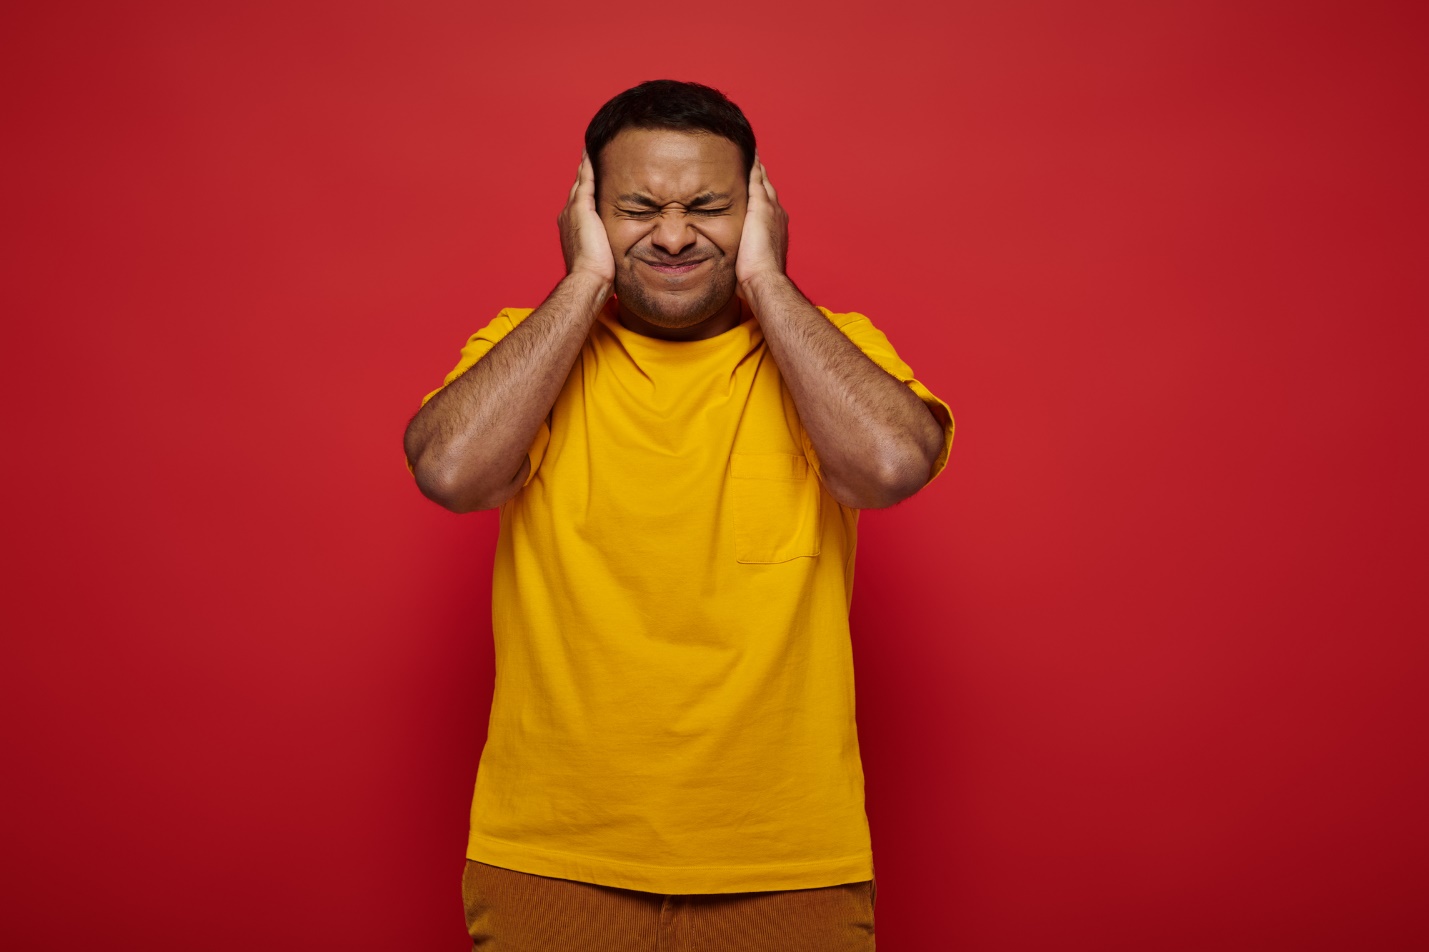 A person in a yellow shirt covering his ears with his hands

Description automatically generated